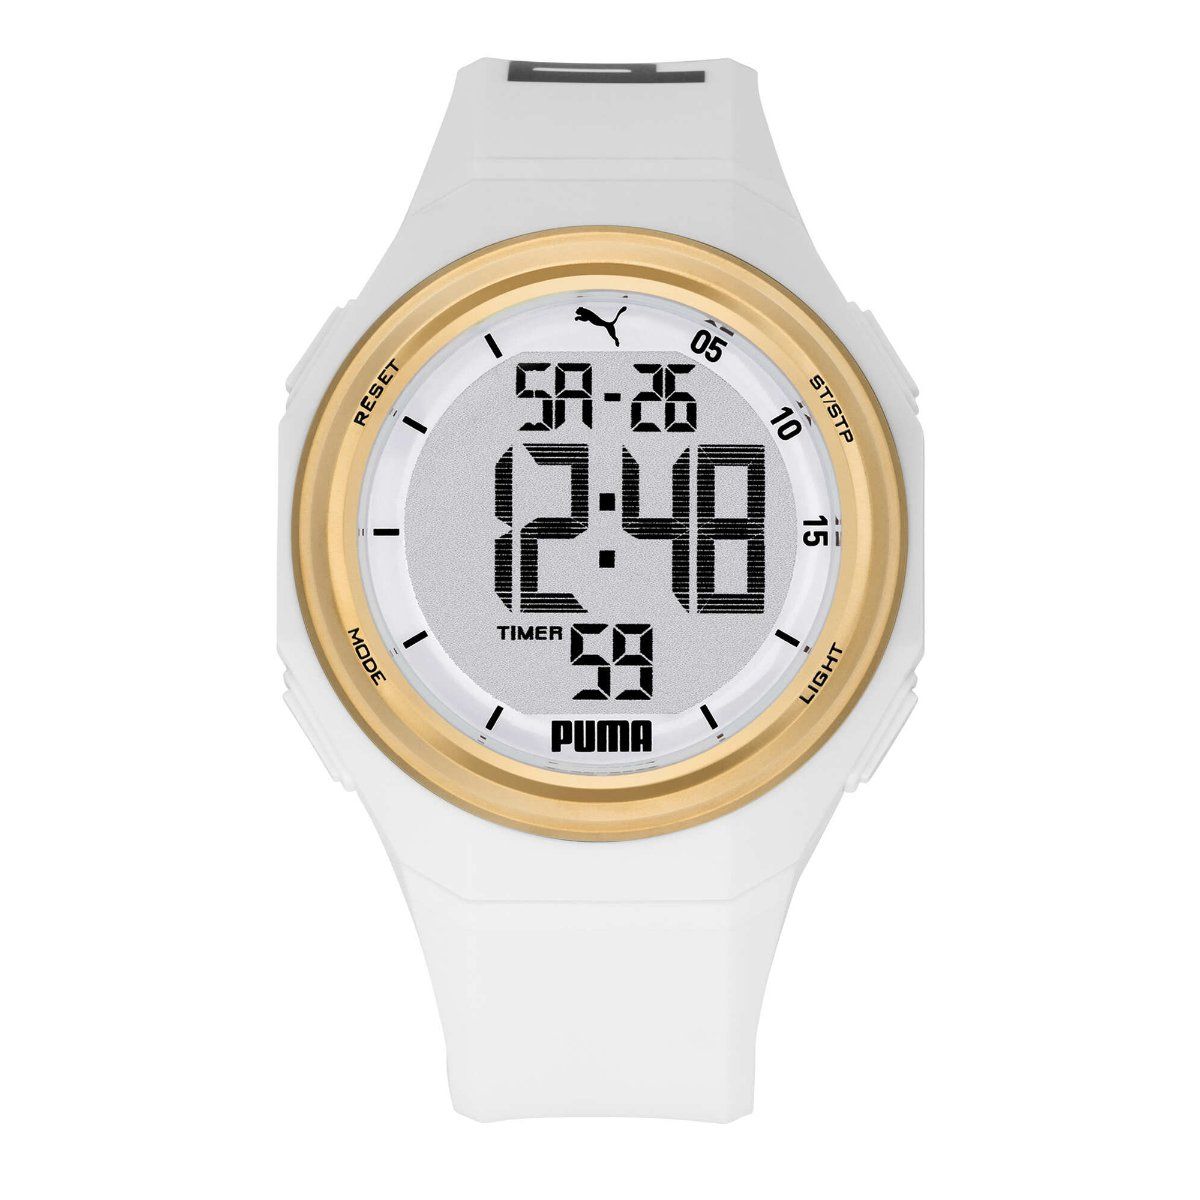 Online Puma watch-Yellow Prices - Shopclues India